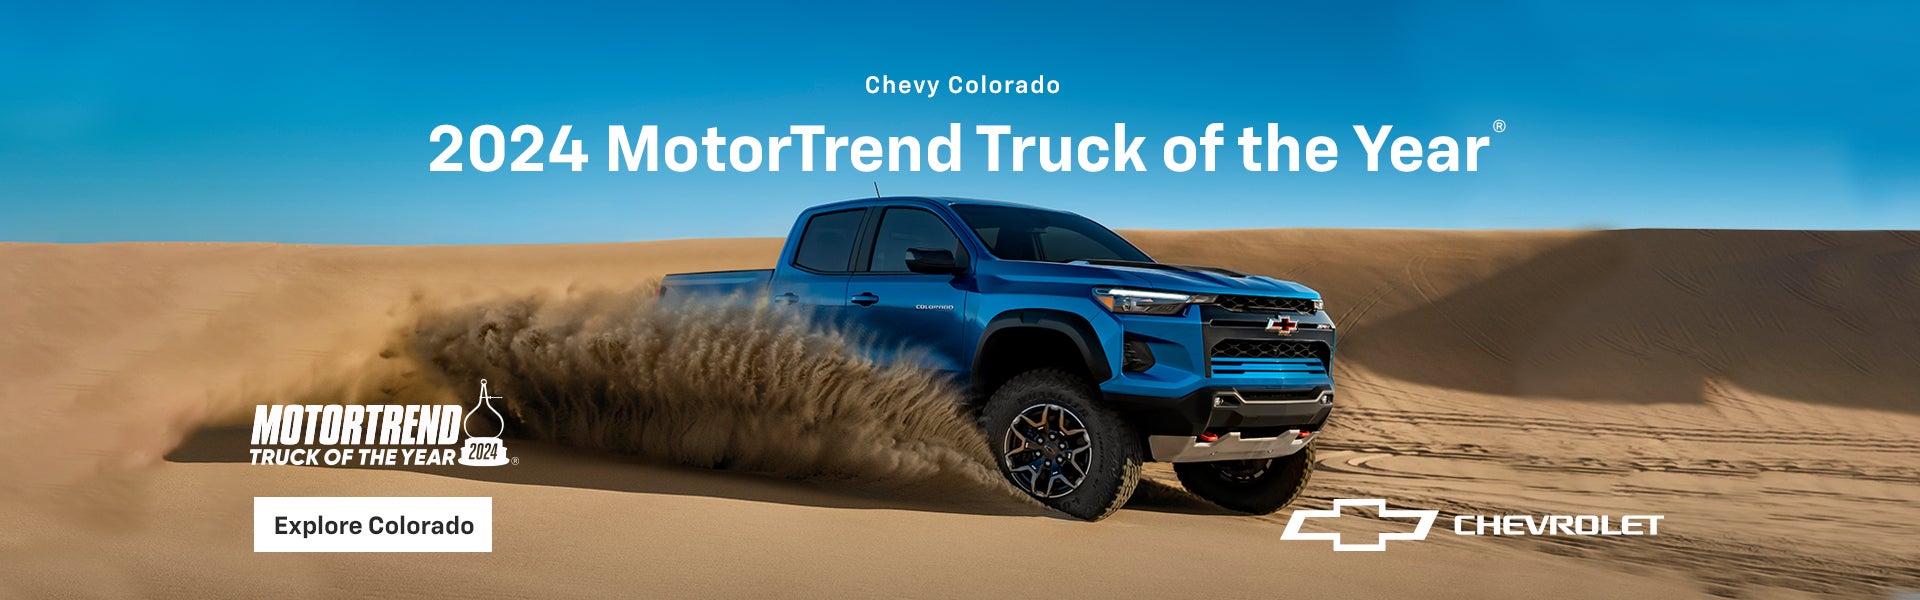 Colorado. 2024 MotorTrend Truck of the Year